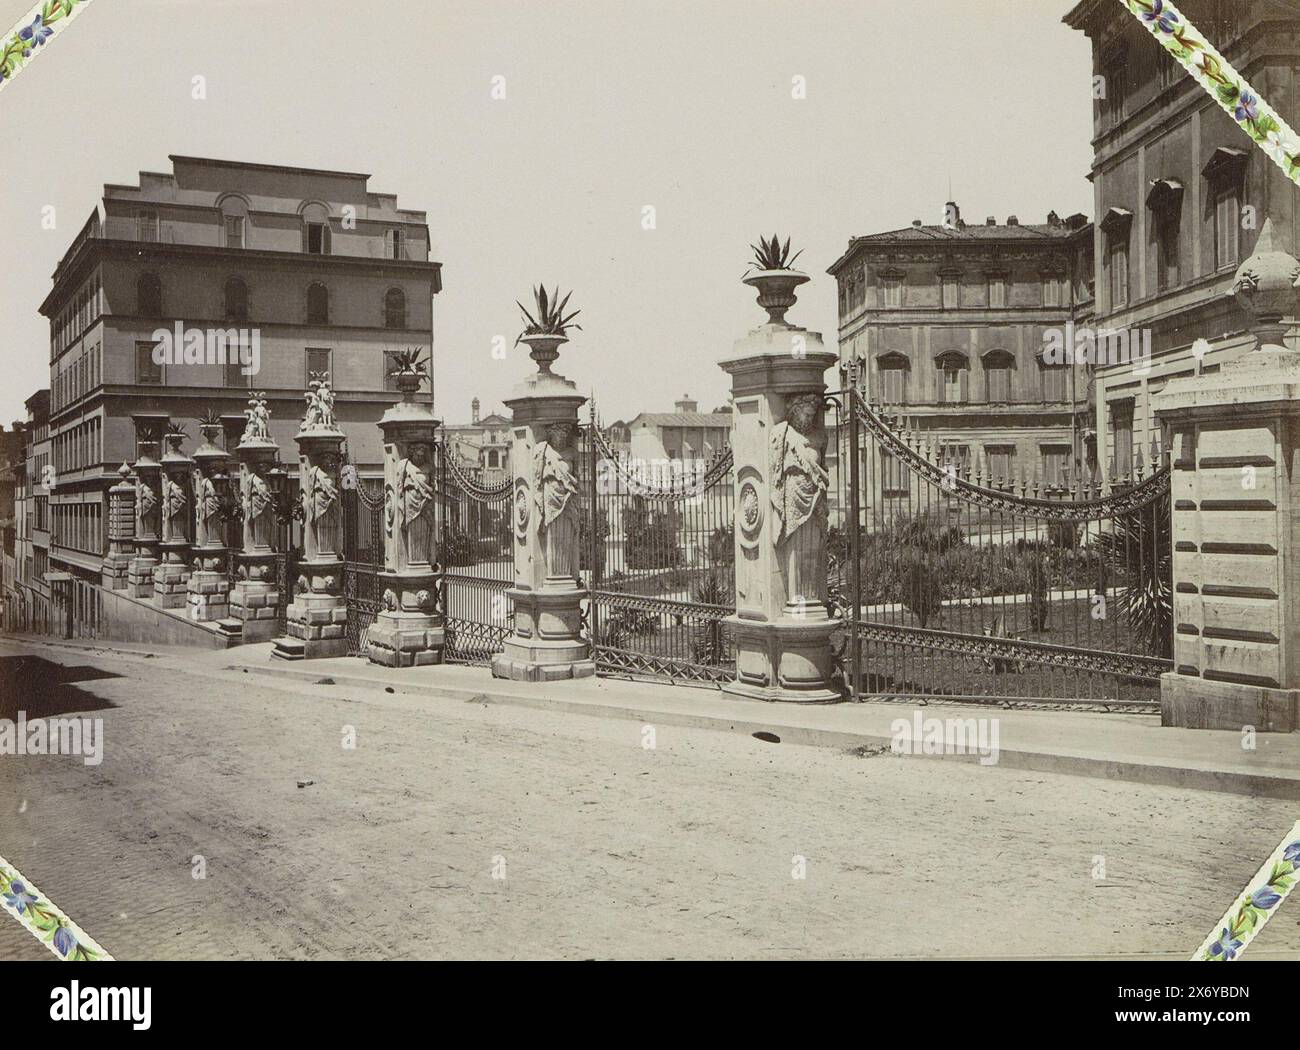 Entrance to the Palazzo Barberini in Rome, Cancelli esterni o ingresso al Palazzo Barberini. Roma (title on object), Part of Photo album with recordings of sights in Italian cities and works of art., photograph, anonymous, Rome, c. 1860 - c. 1900, photographic support, albumen print, height, 187 mm × width, 248 mm Stock Photo